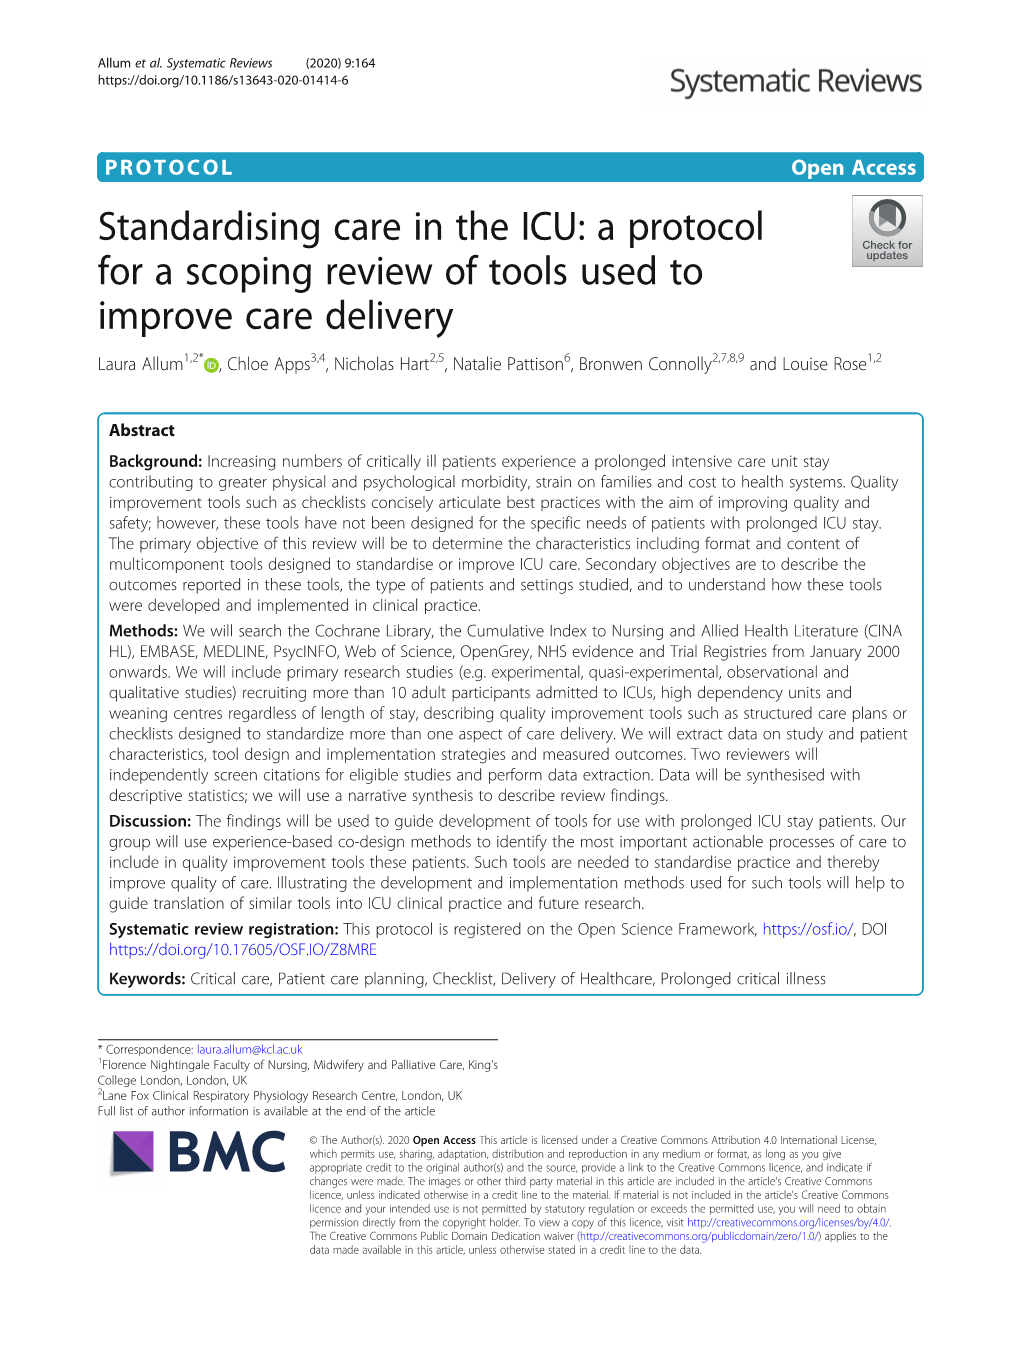 Standardising Care in The